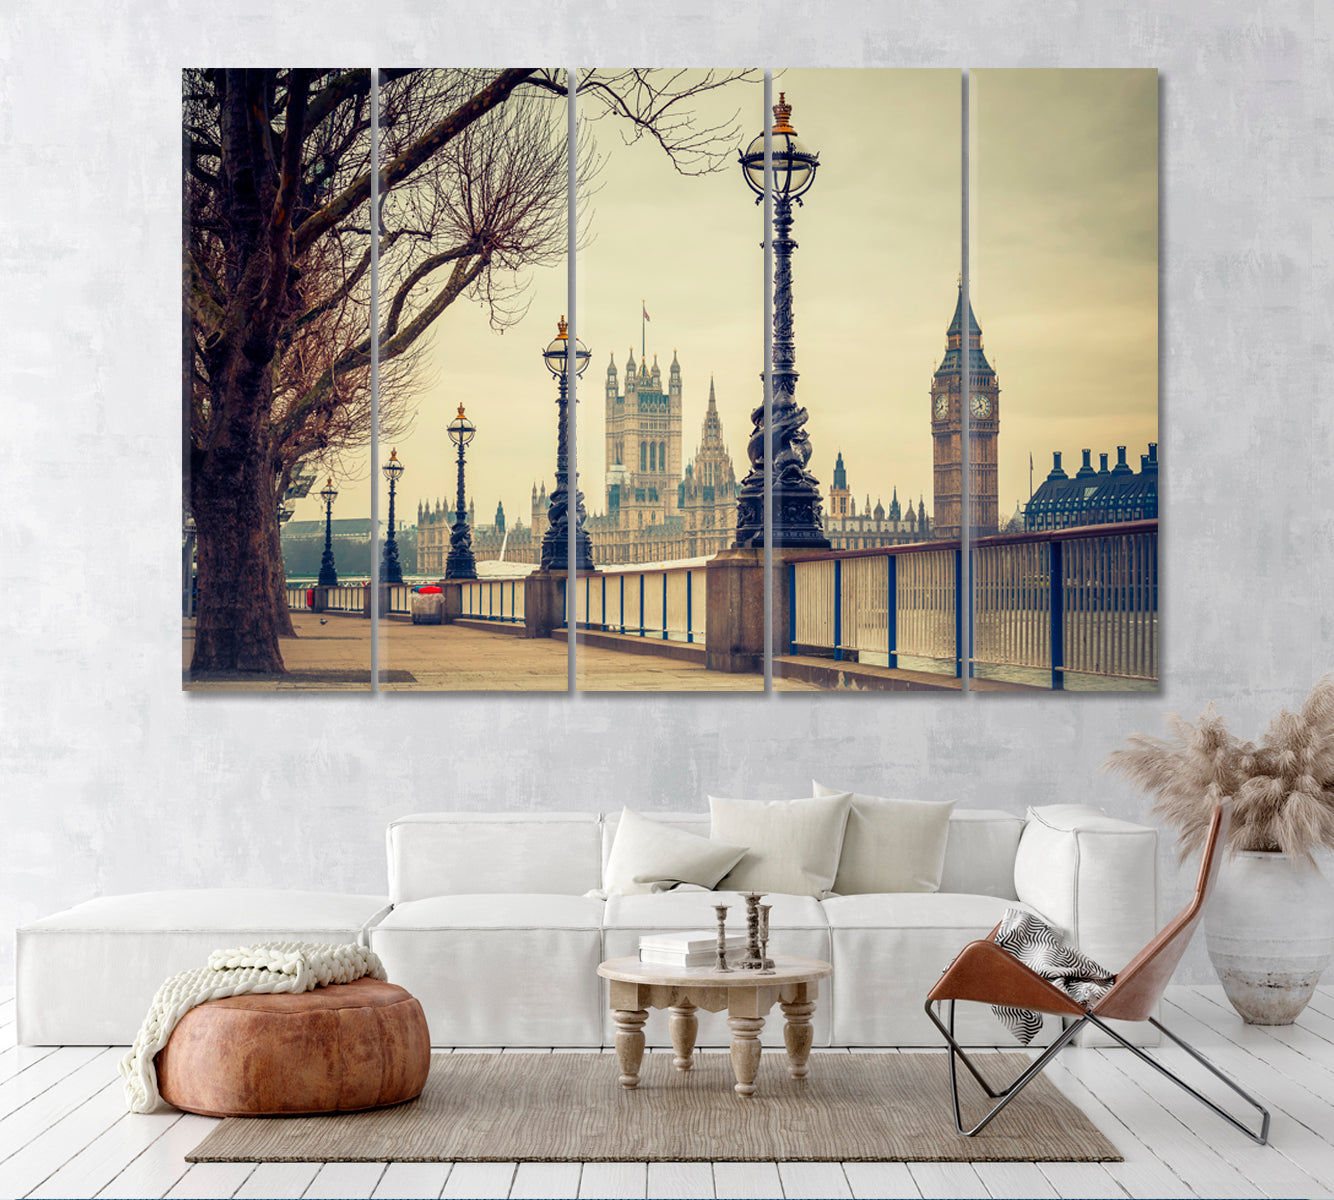 Big Ben and Houses of Parliament London UK Canvas Print ArtLexy 5 Panels 36"x24" inches 